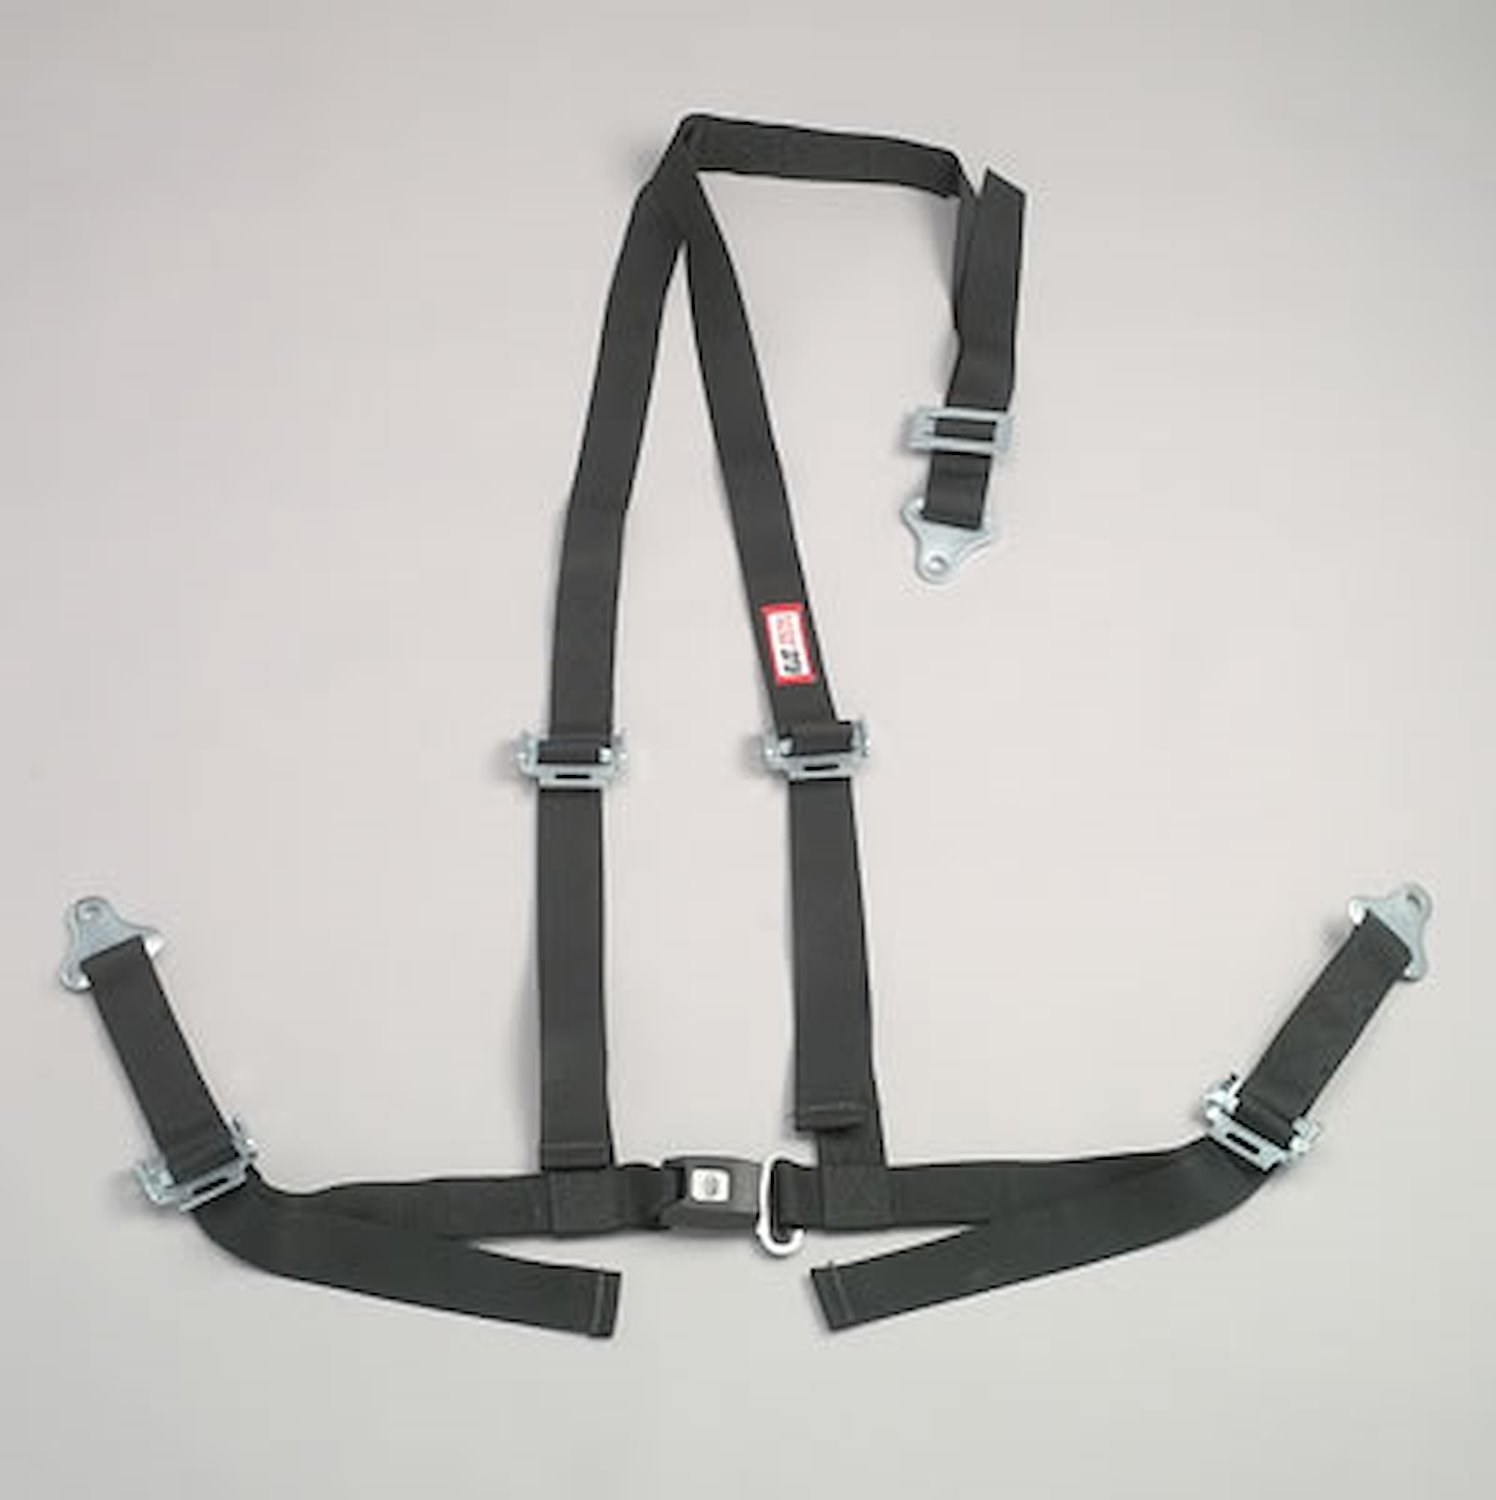 NON-SFI B&T HARNESS 2 PULL UP Lap Belt 2 S. H. V ROLL BAR Mount ALL WRAP ENDS w/STERNUM STRAP ORANGE